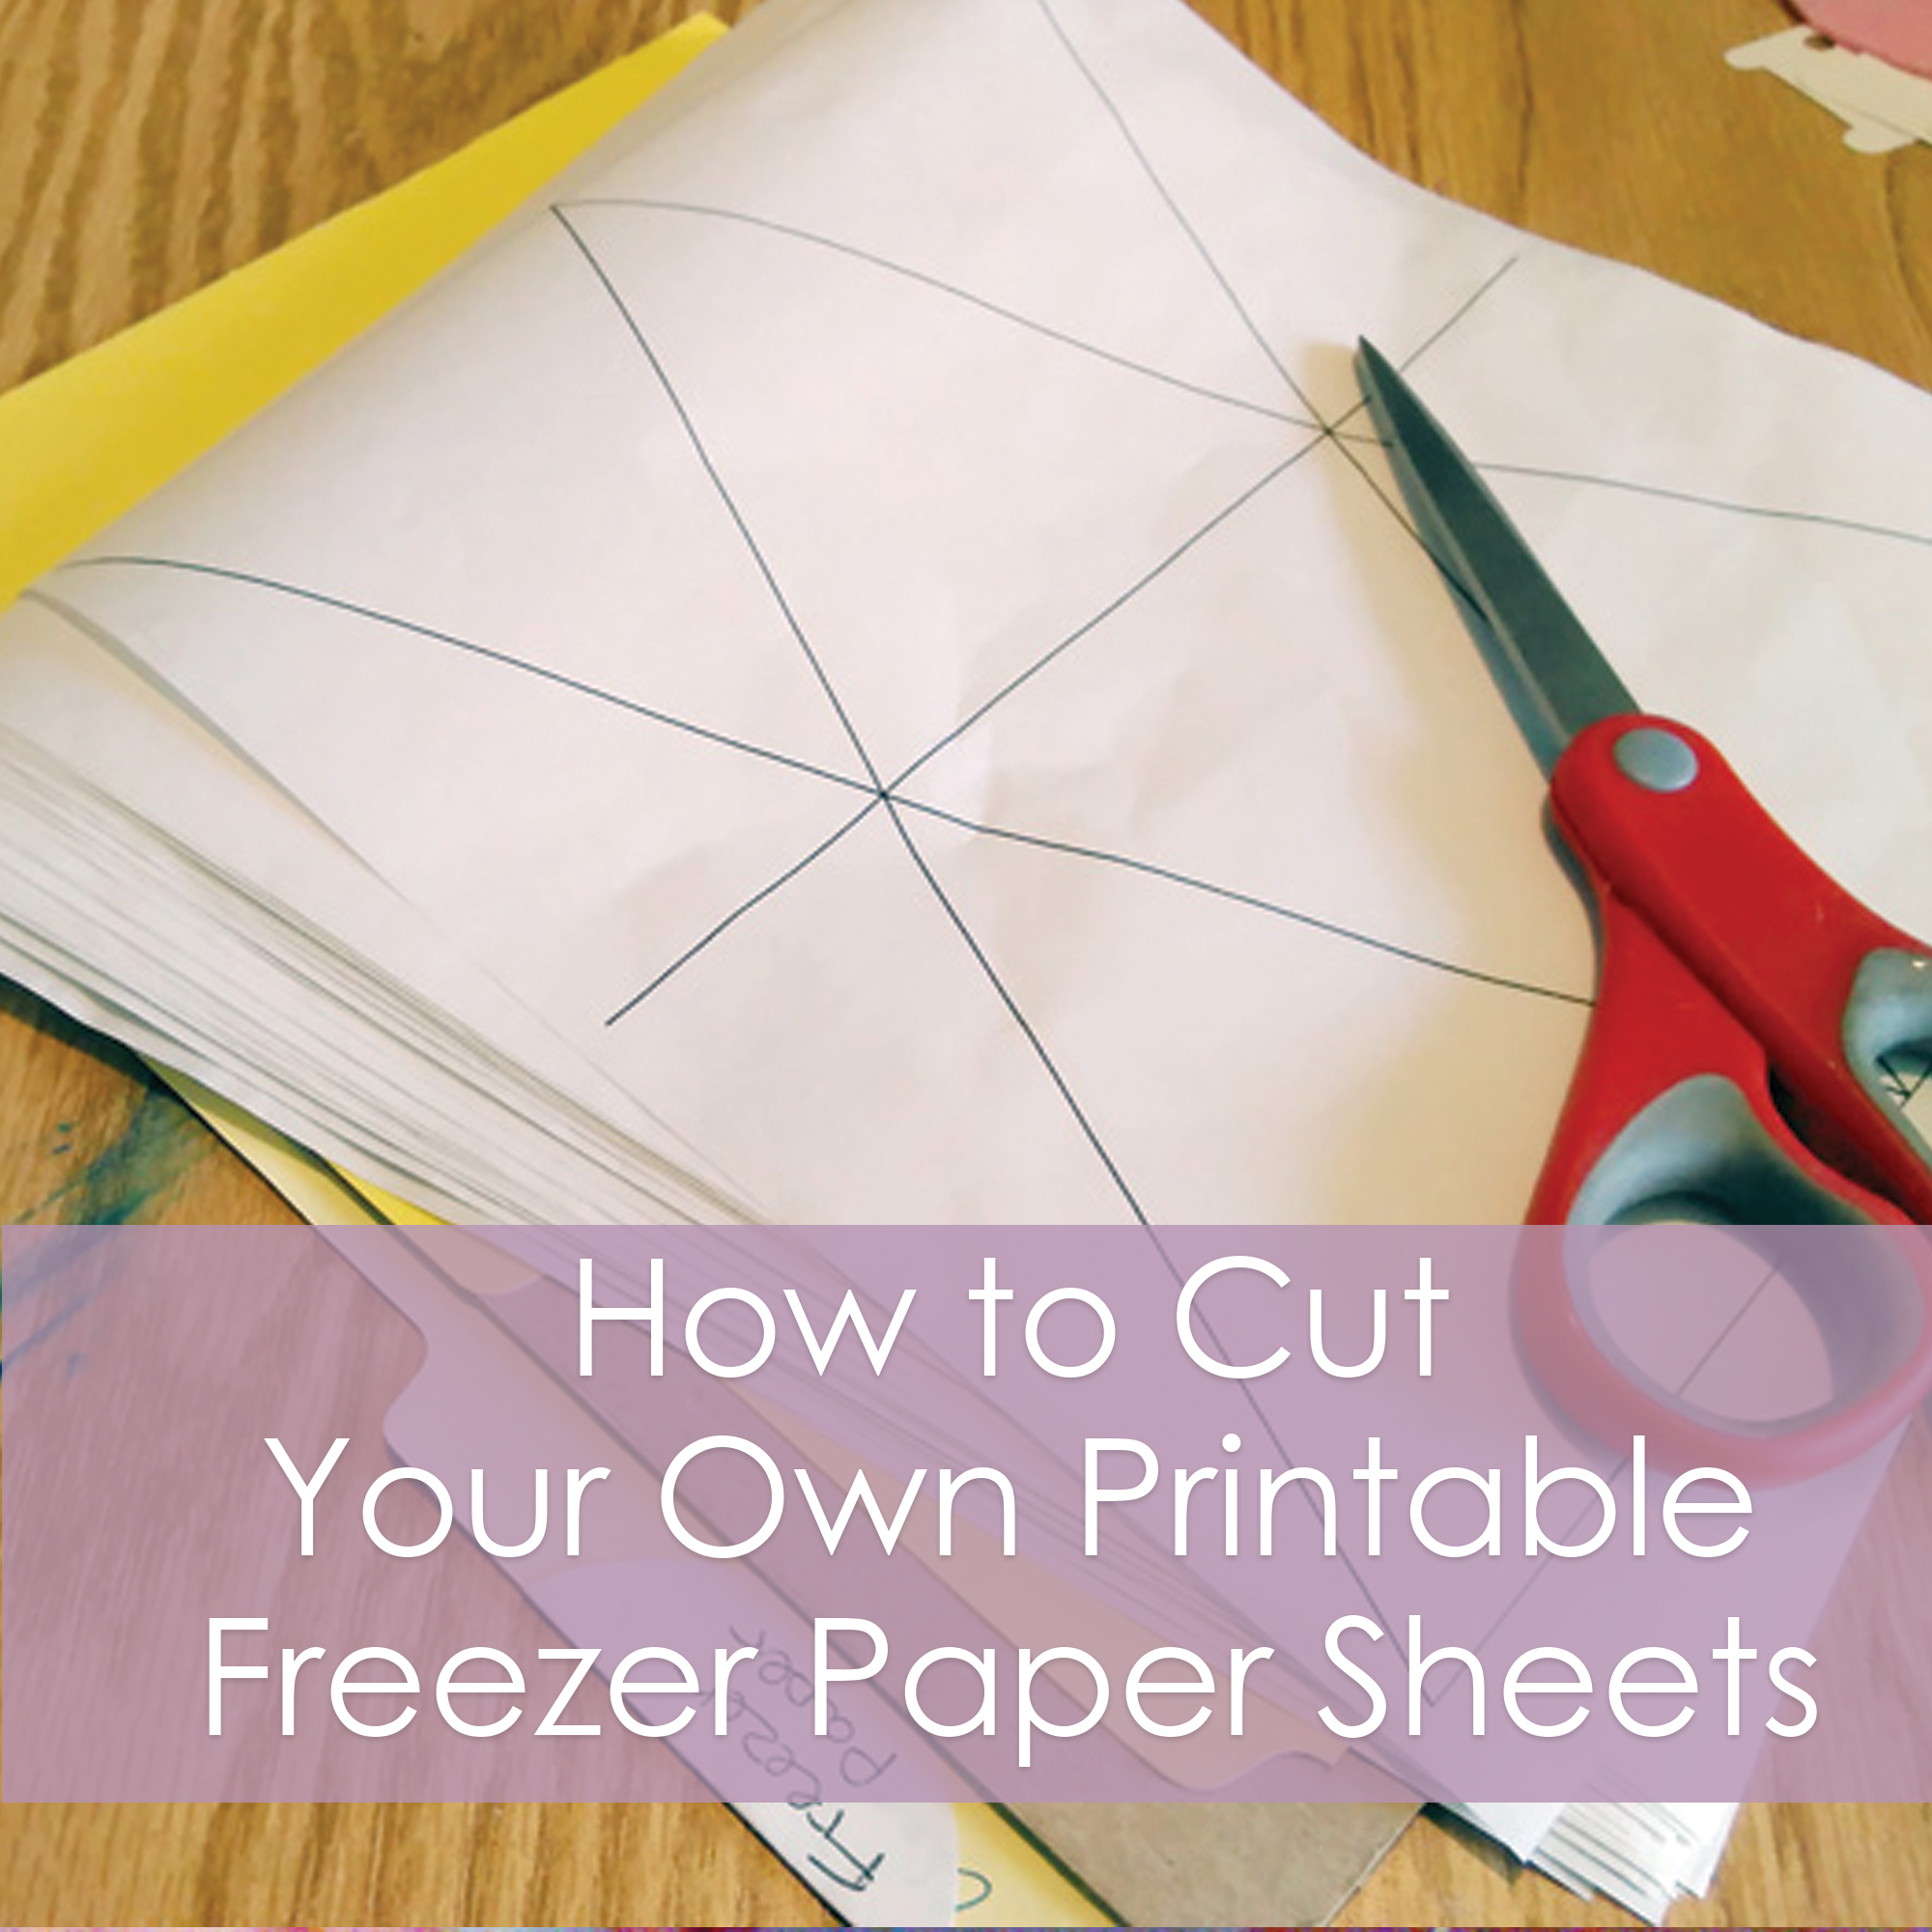 How To Cut Your Own Freezer Paper Sheets – Muse of the Morning